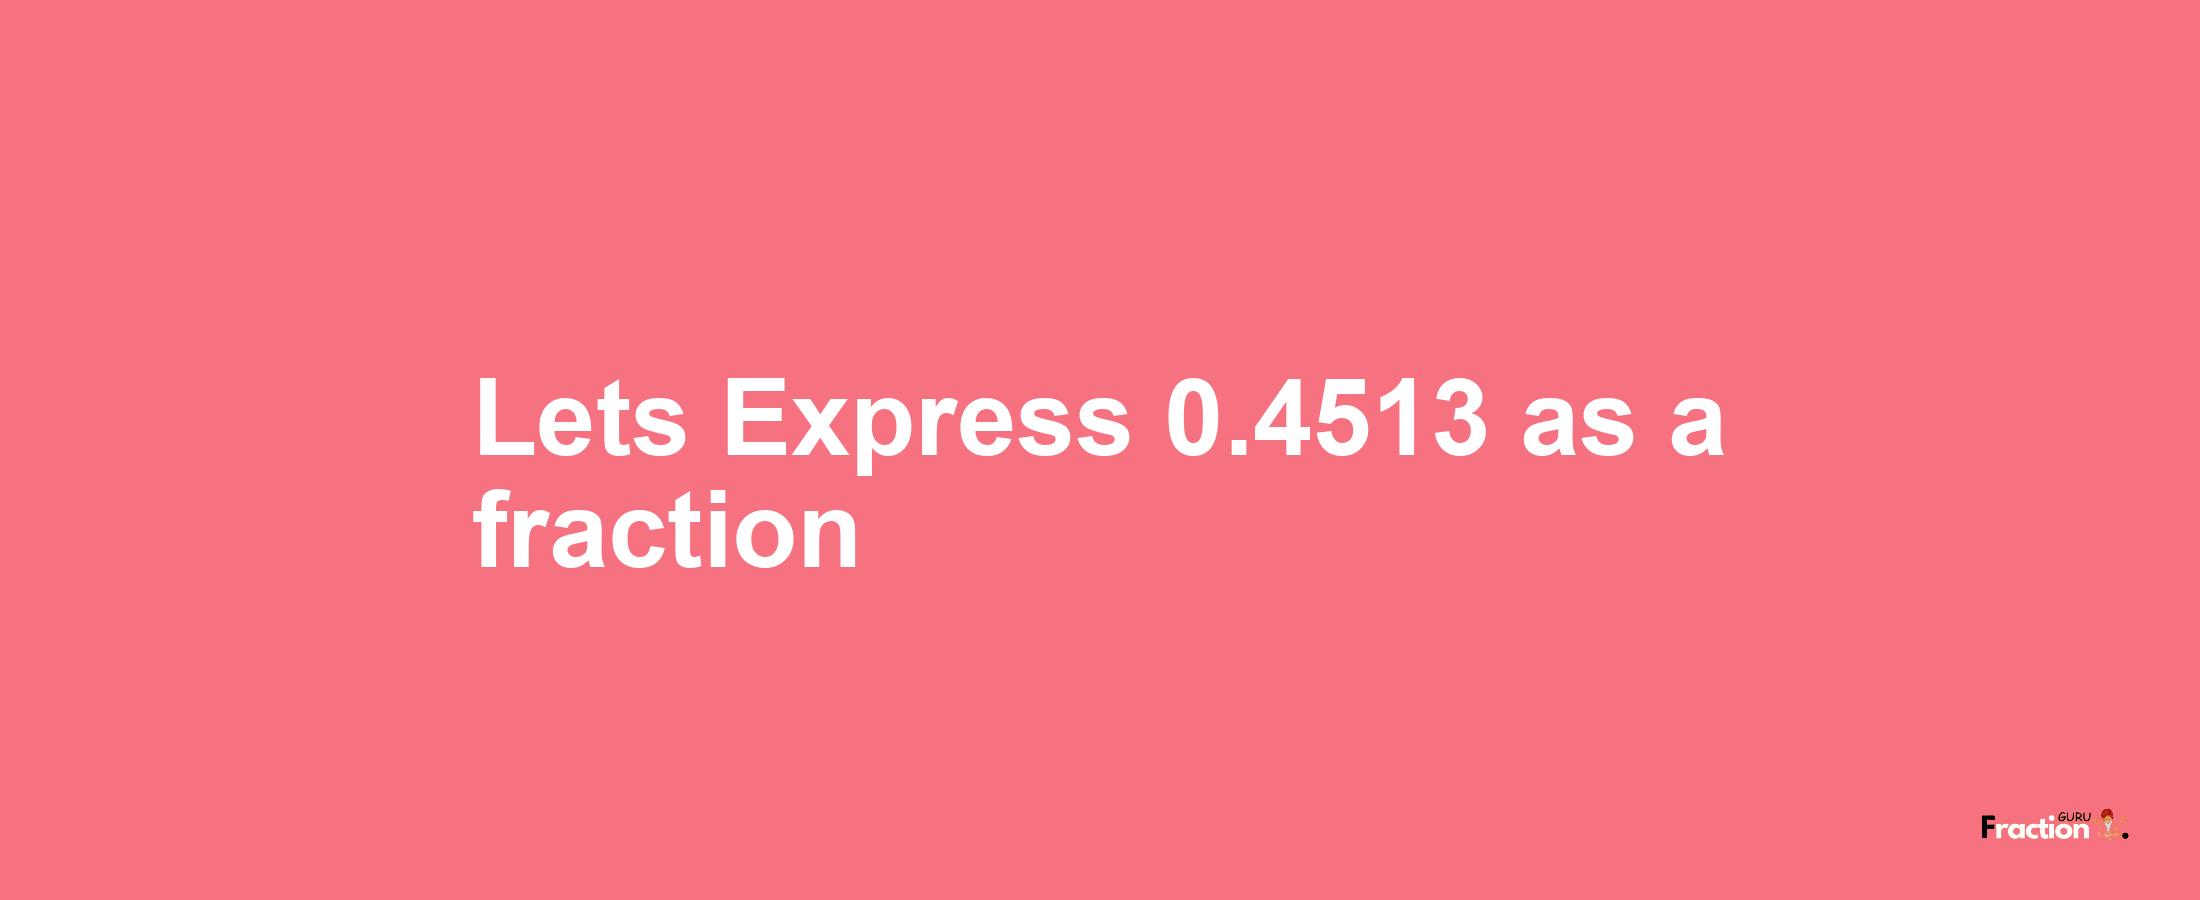 Lets Express 0.4513 as afraction